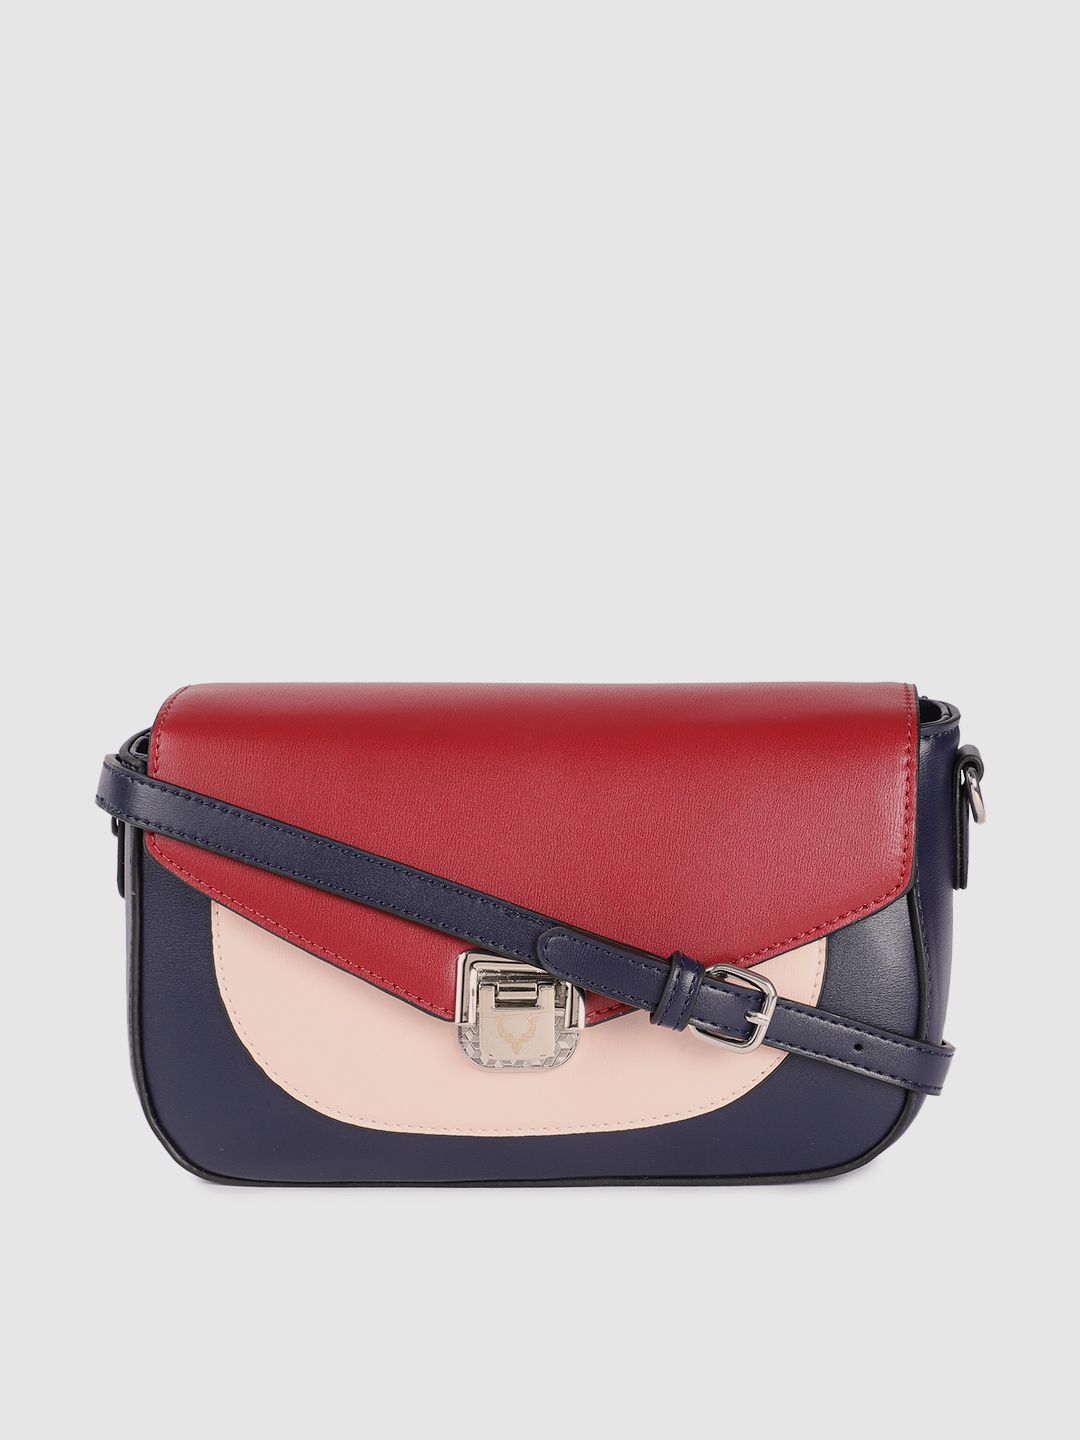 Allen Solly Navy Blue Colourblocked PU Regular Structured Sling Bag Price in India